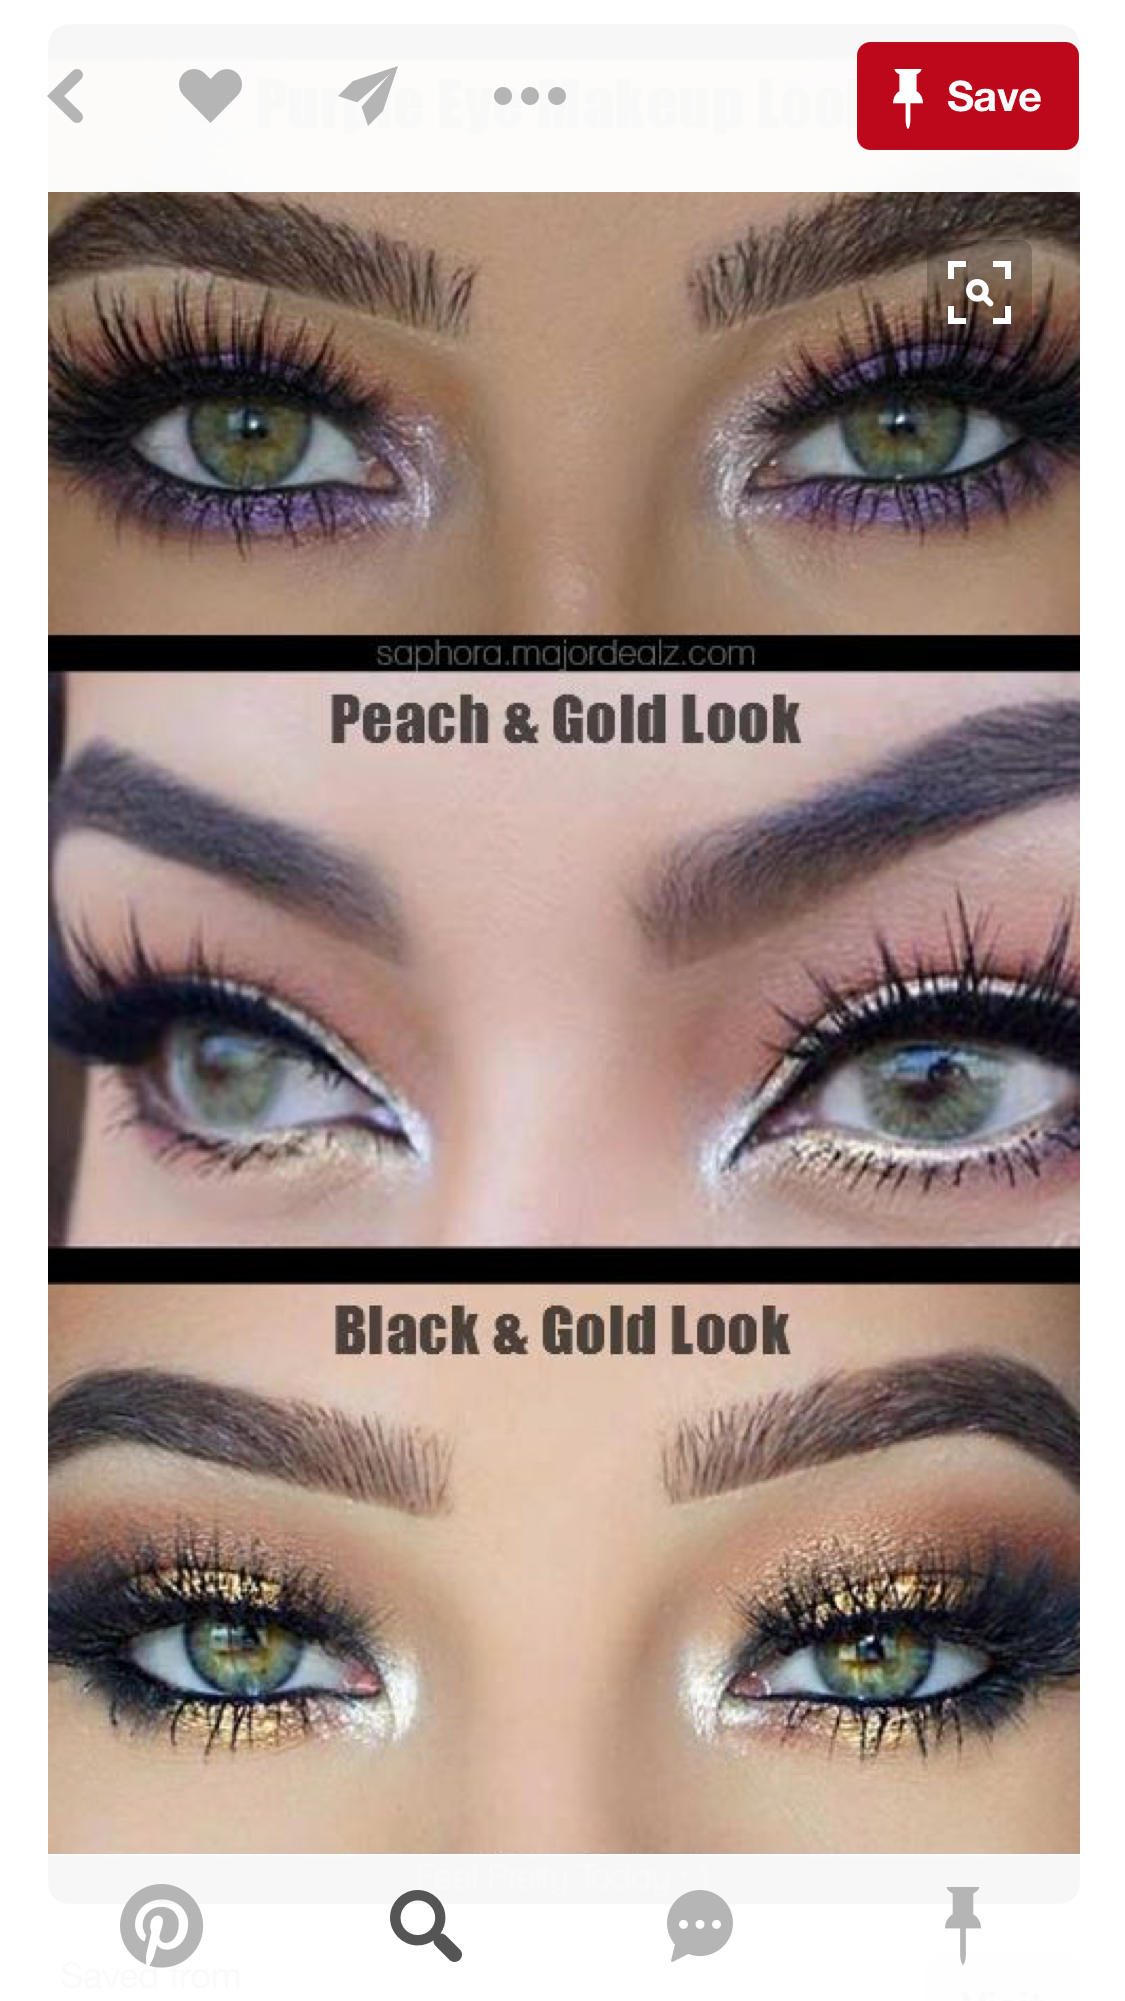 Best Eye Makeup For Green Eyes Pin Lexi On Makeup Pinterest Makeup For Green Eyes Makeup